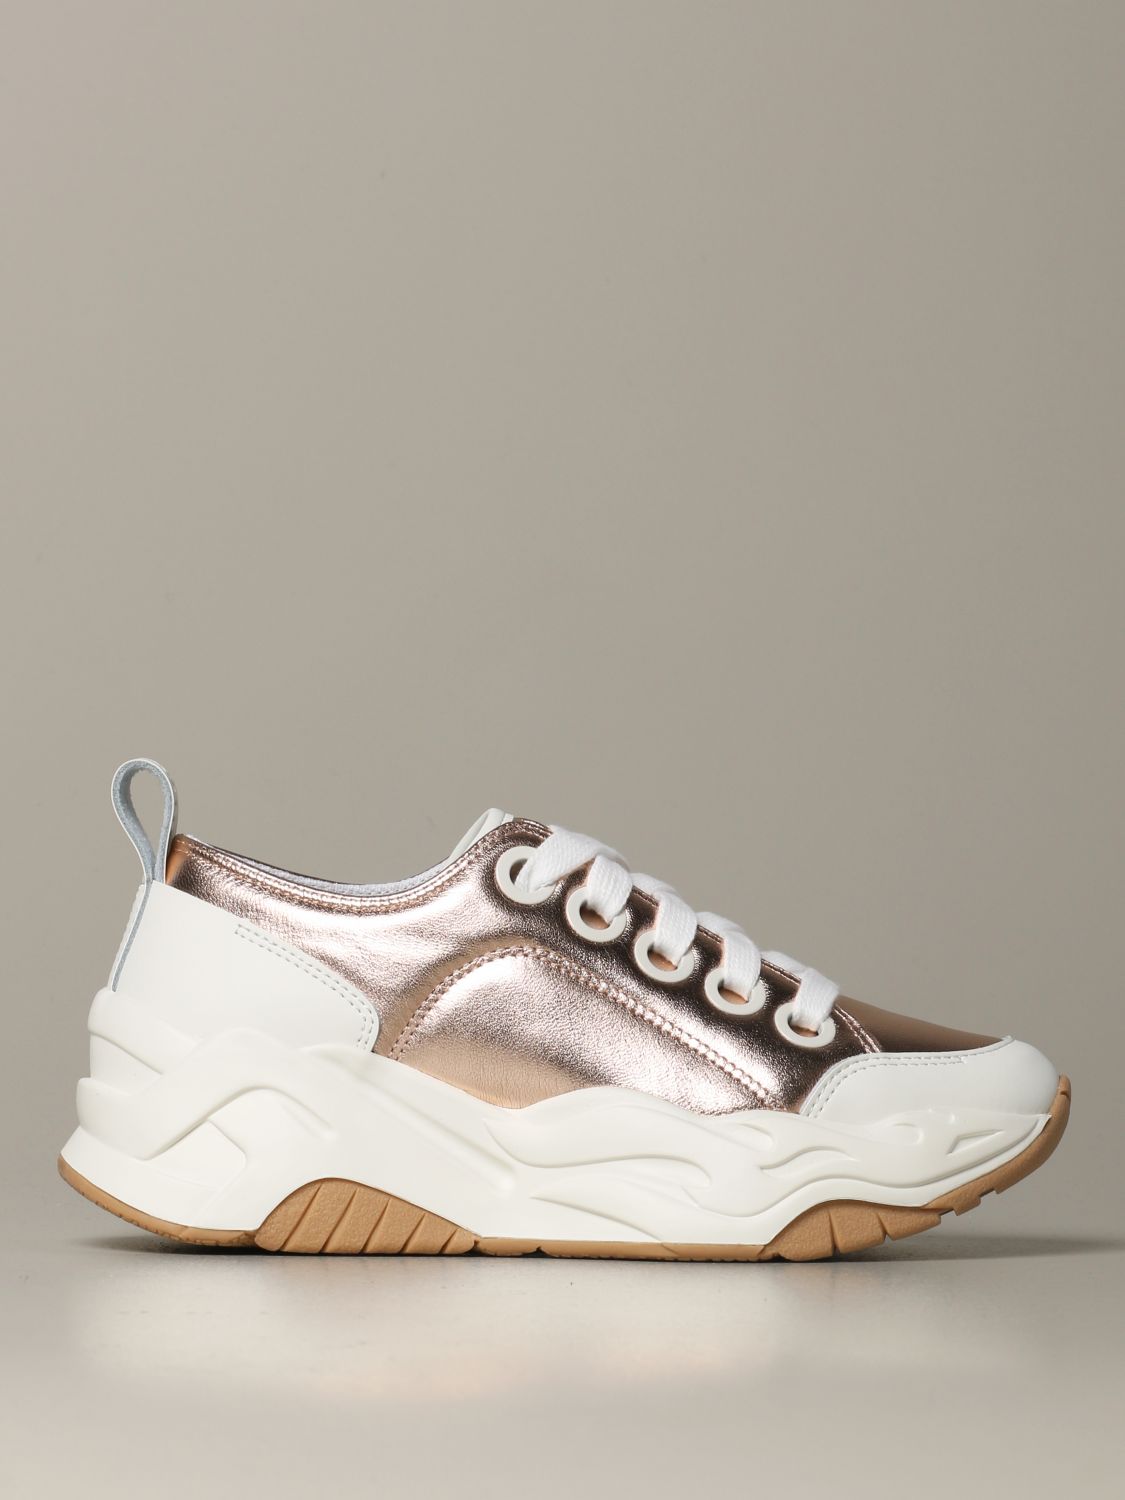 Just Cavalli Outlet: P1thon sneakers in laminated leather | Sneakers Just Cavalli Women Bronze | Sneakers Just Cavalli S09WS0092 GIGLIO.COM